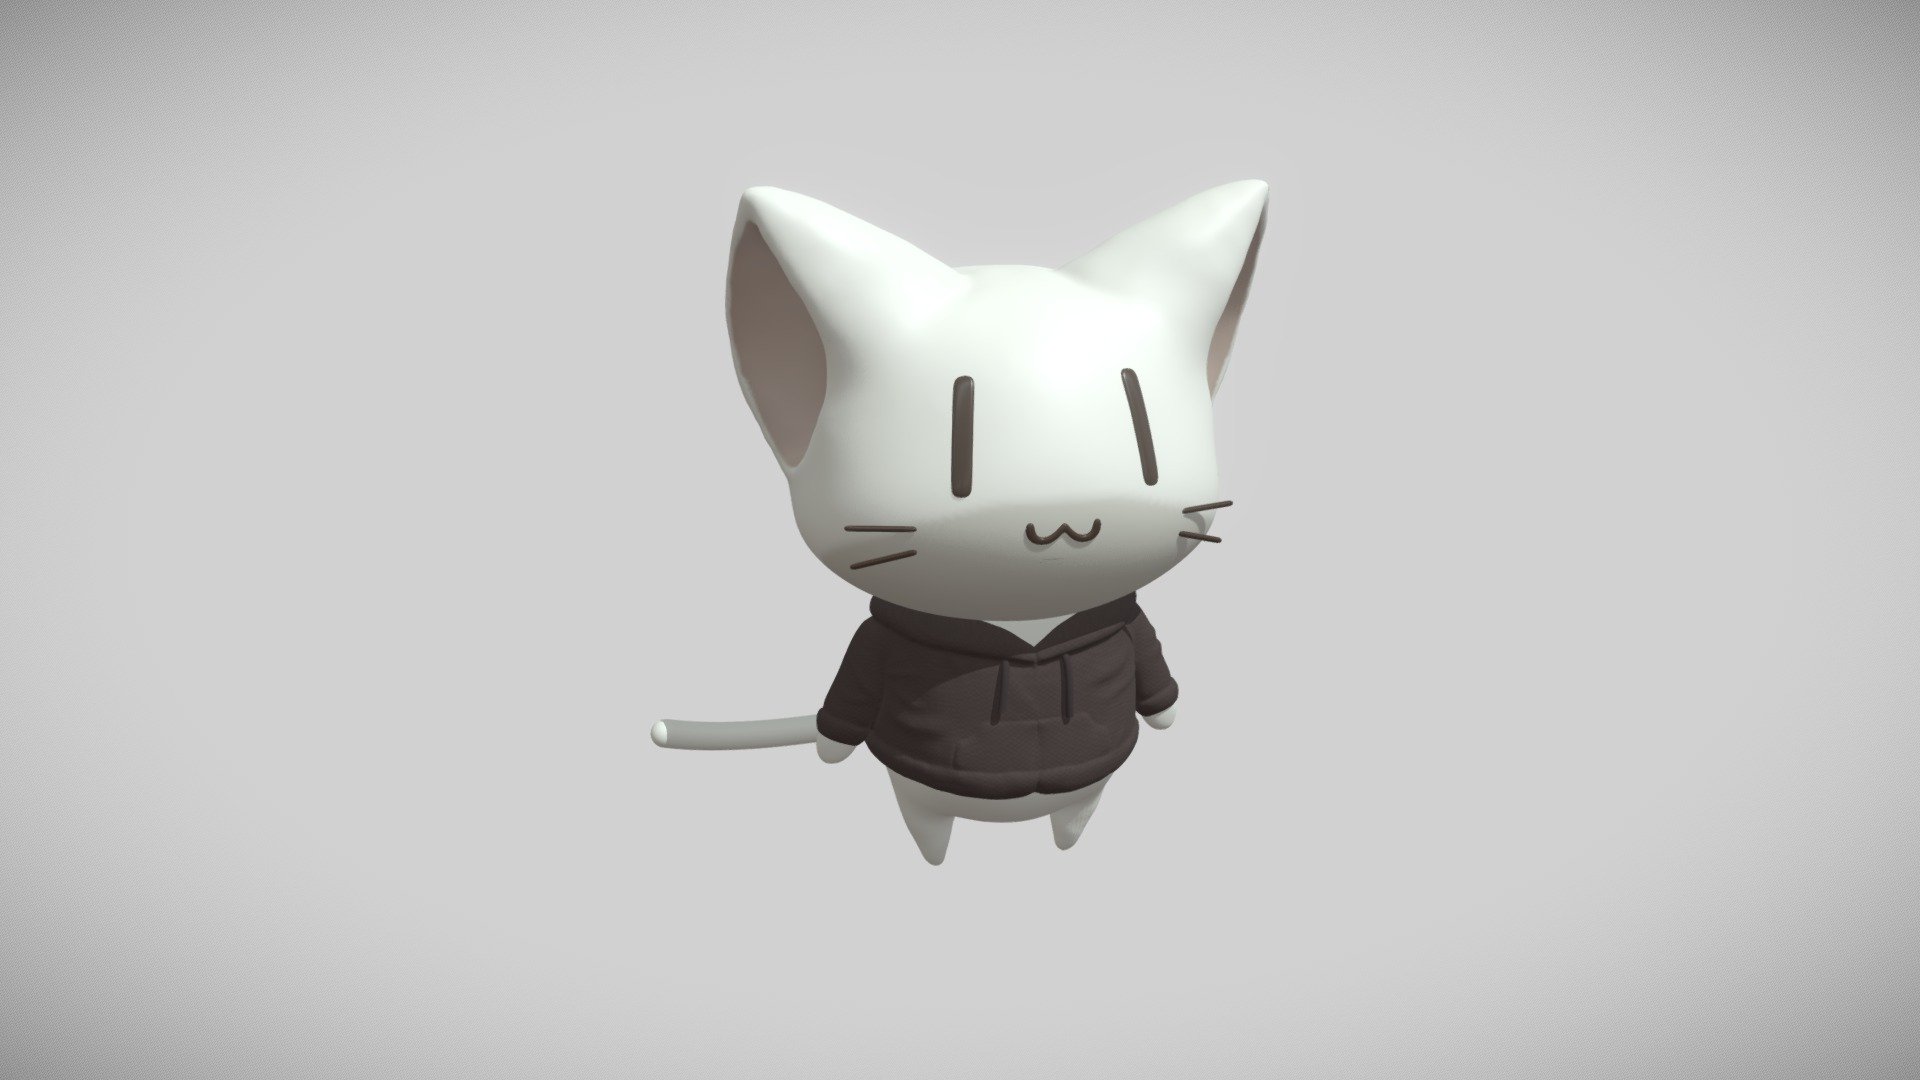 Whitecat Osu Download Free 3d Model By Covector Covector 64af3c5 Sketchfab